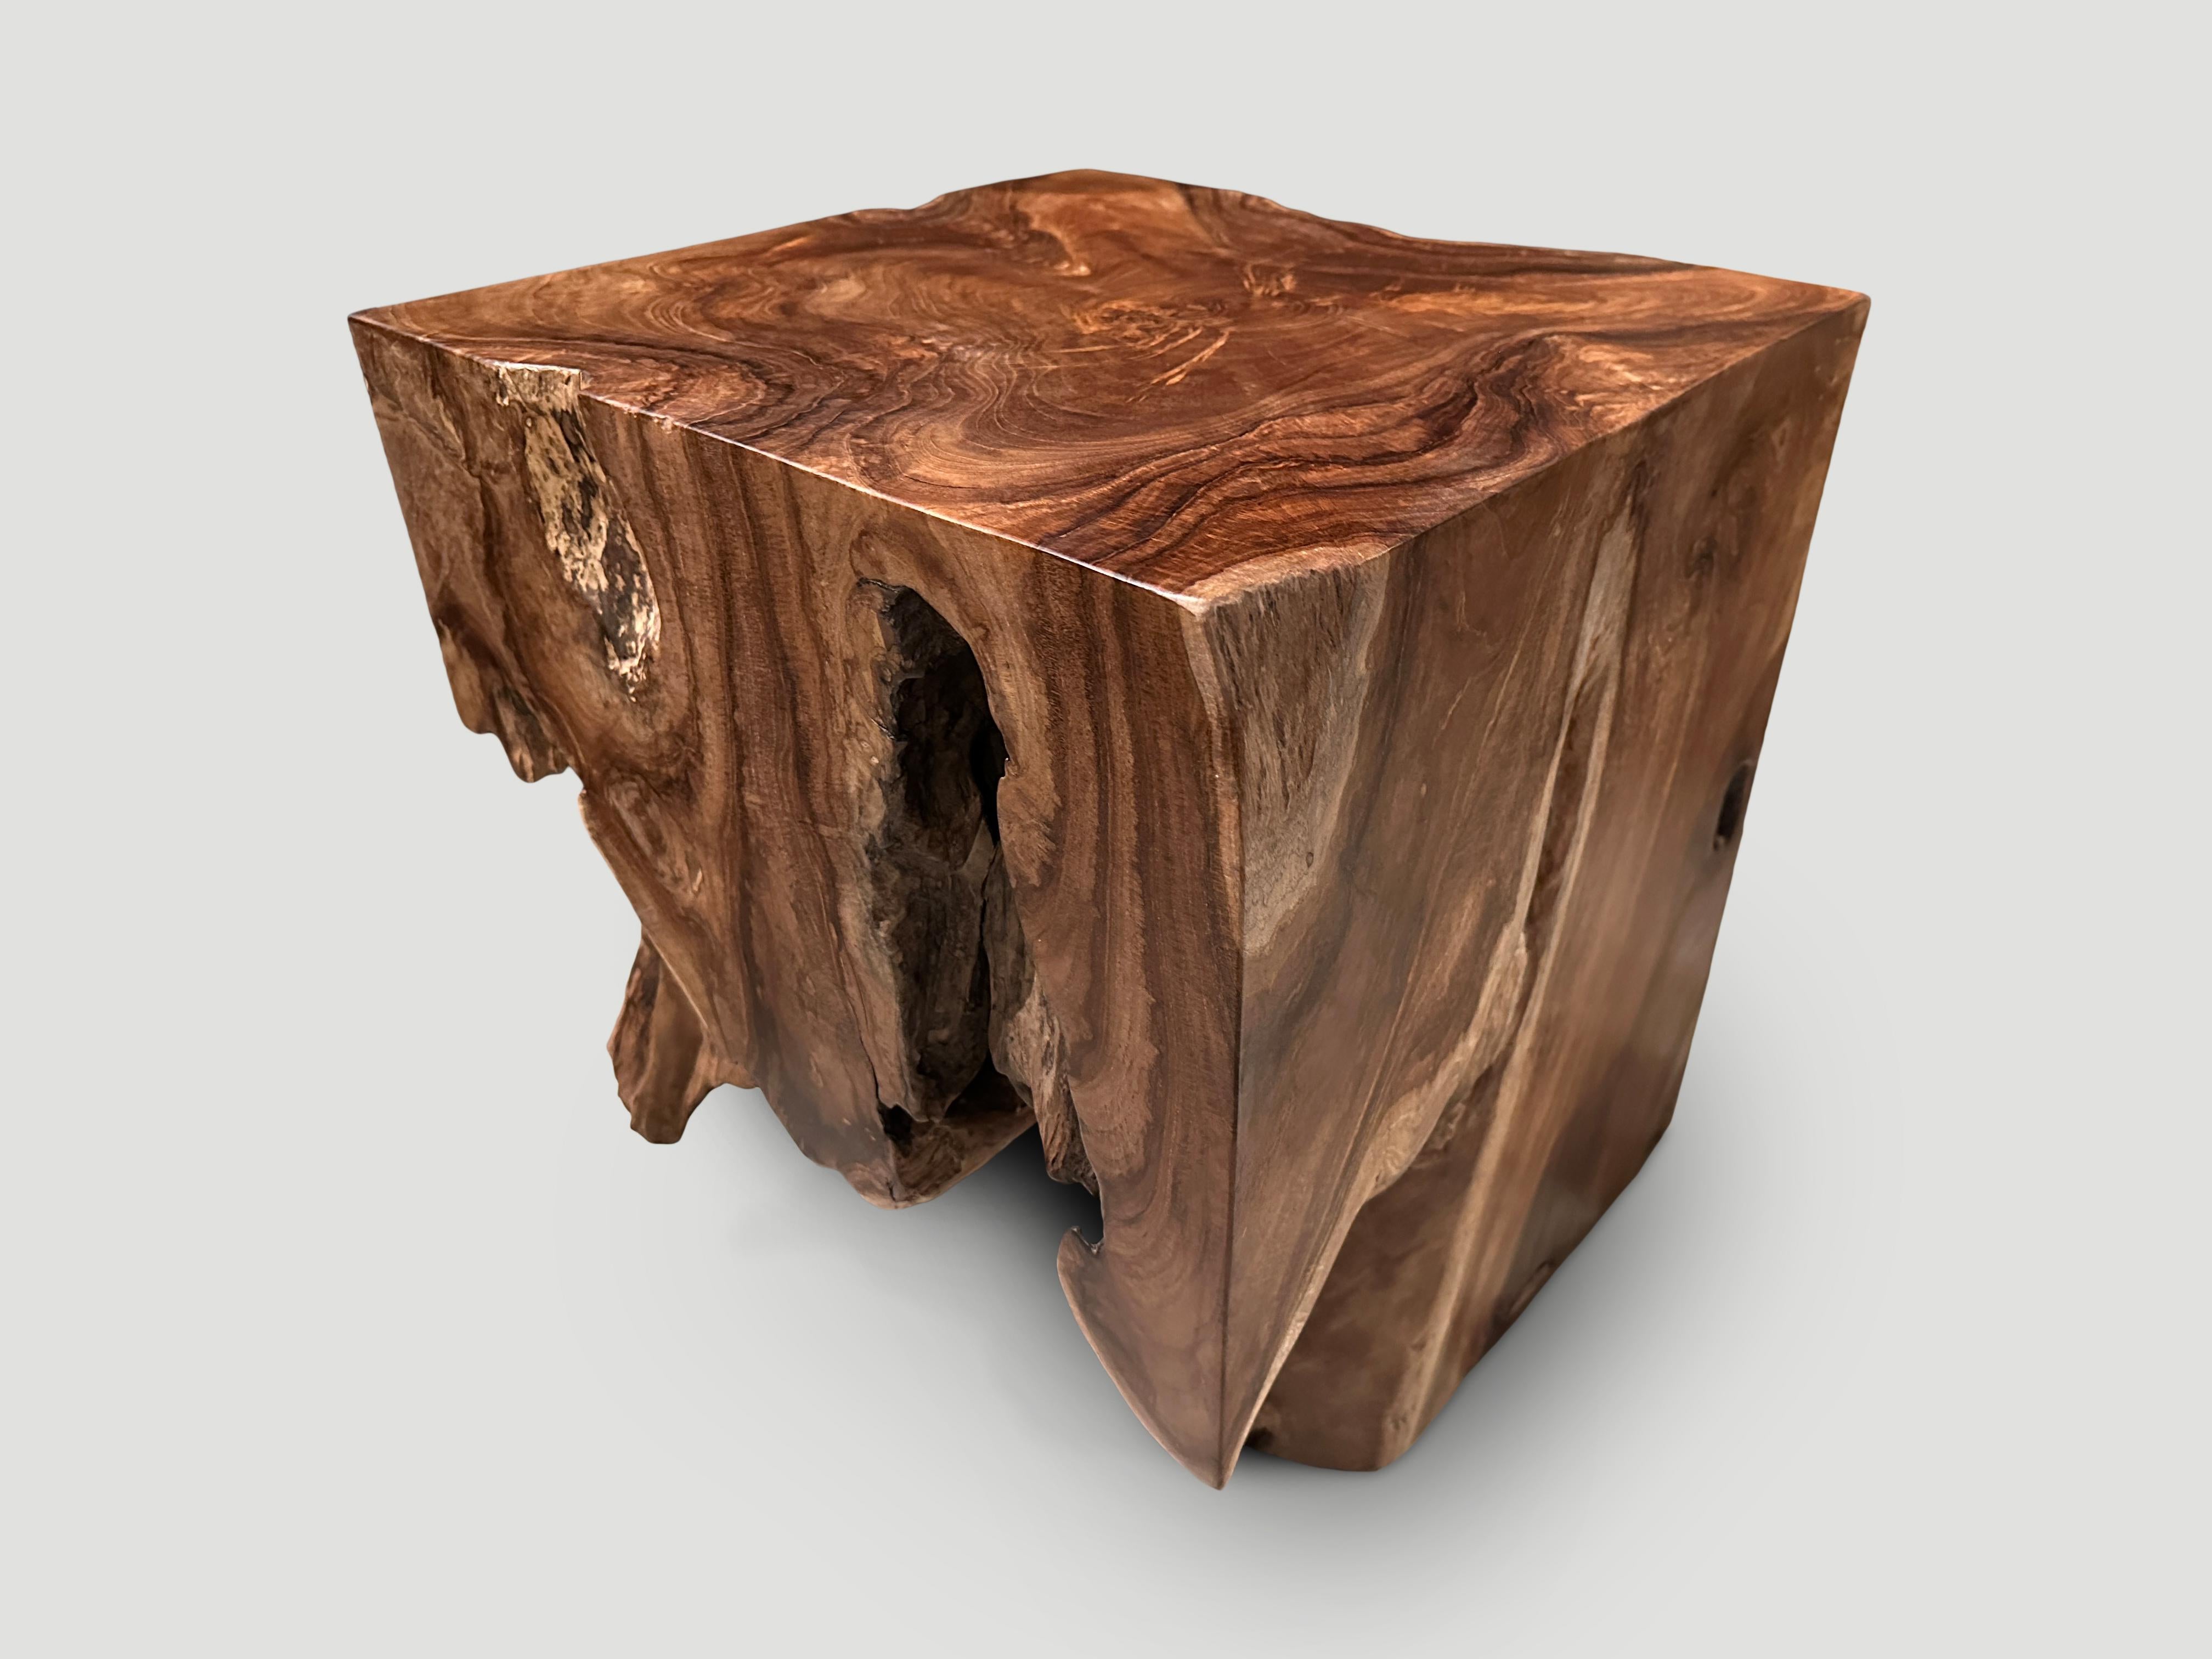 Andrianna Shamaris Sculptural Teak Wood Side Table In Excellent Condition For Sale In New York, NY